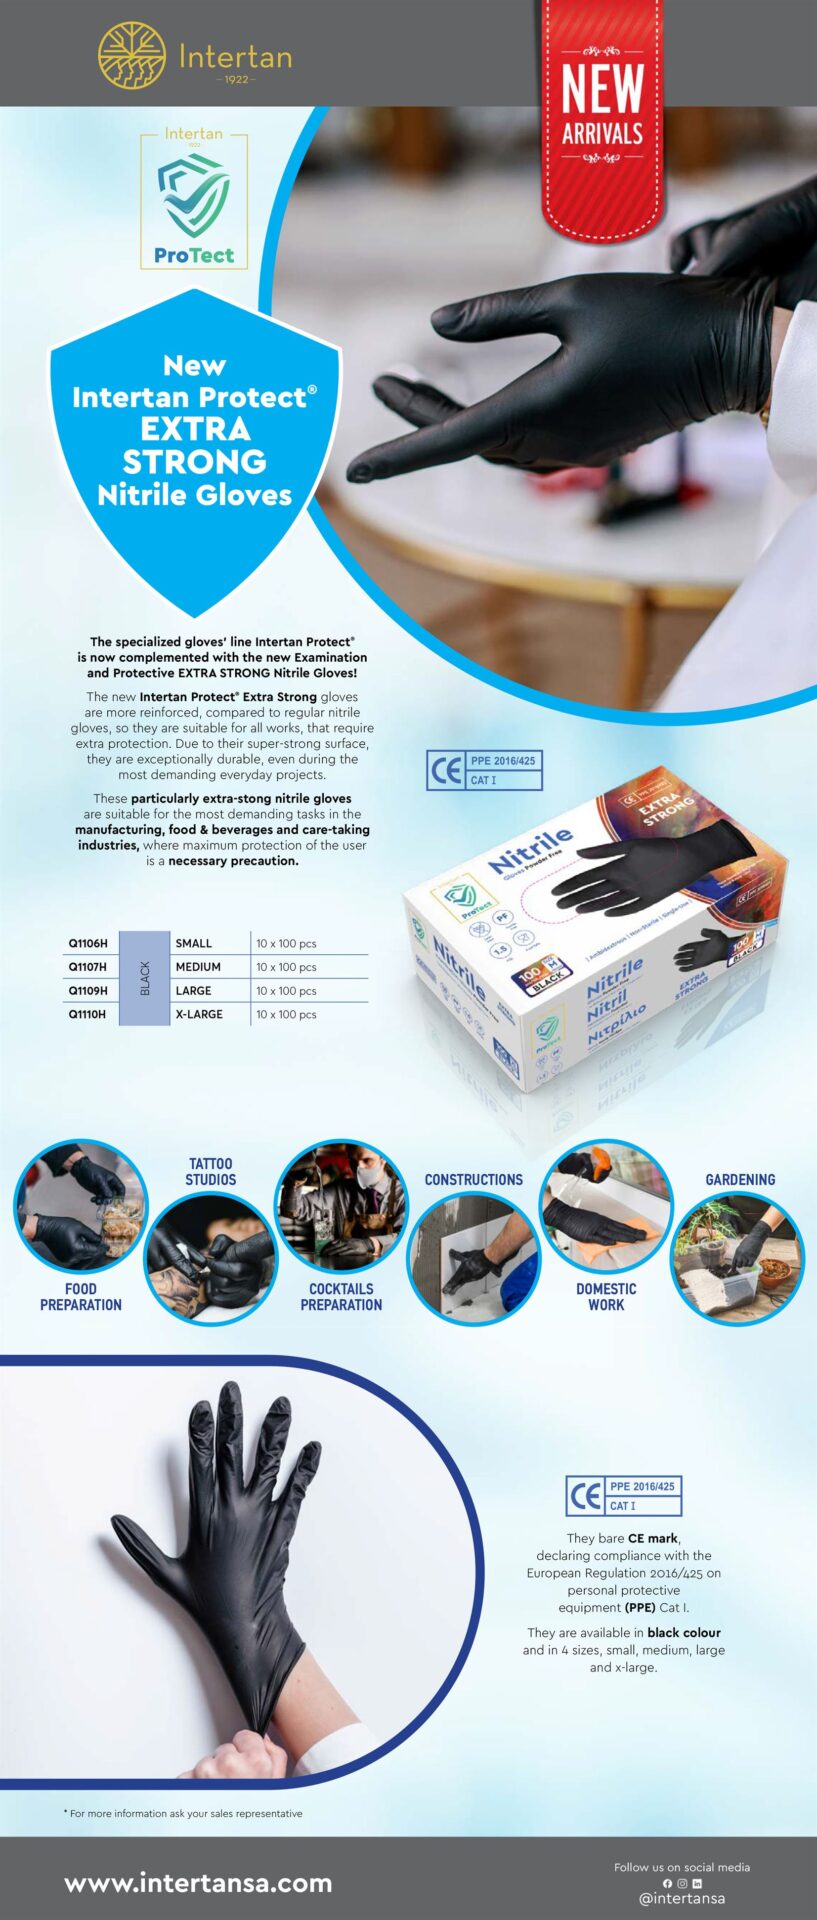 New Extra Strong Nitrile Gloves Newsletter | Intertan S.A.